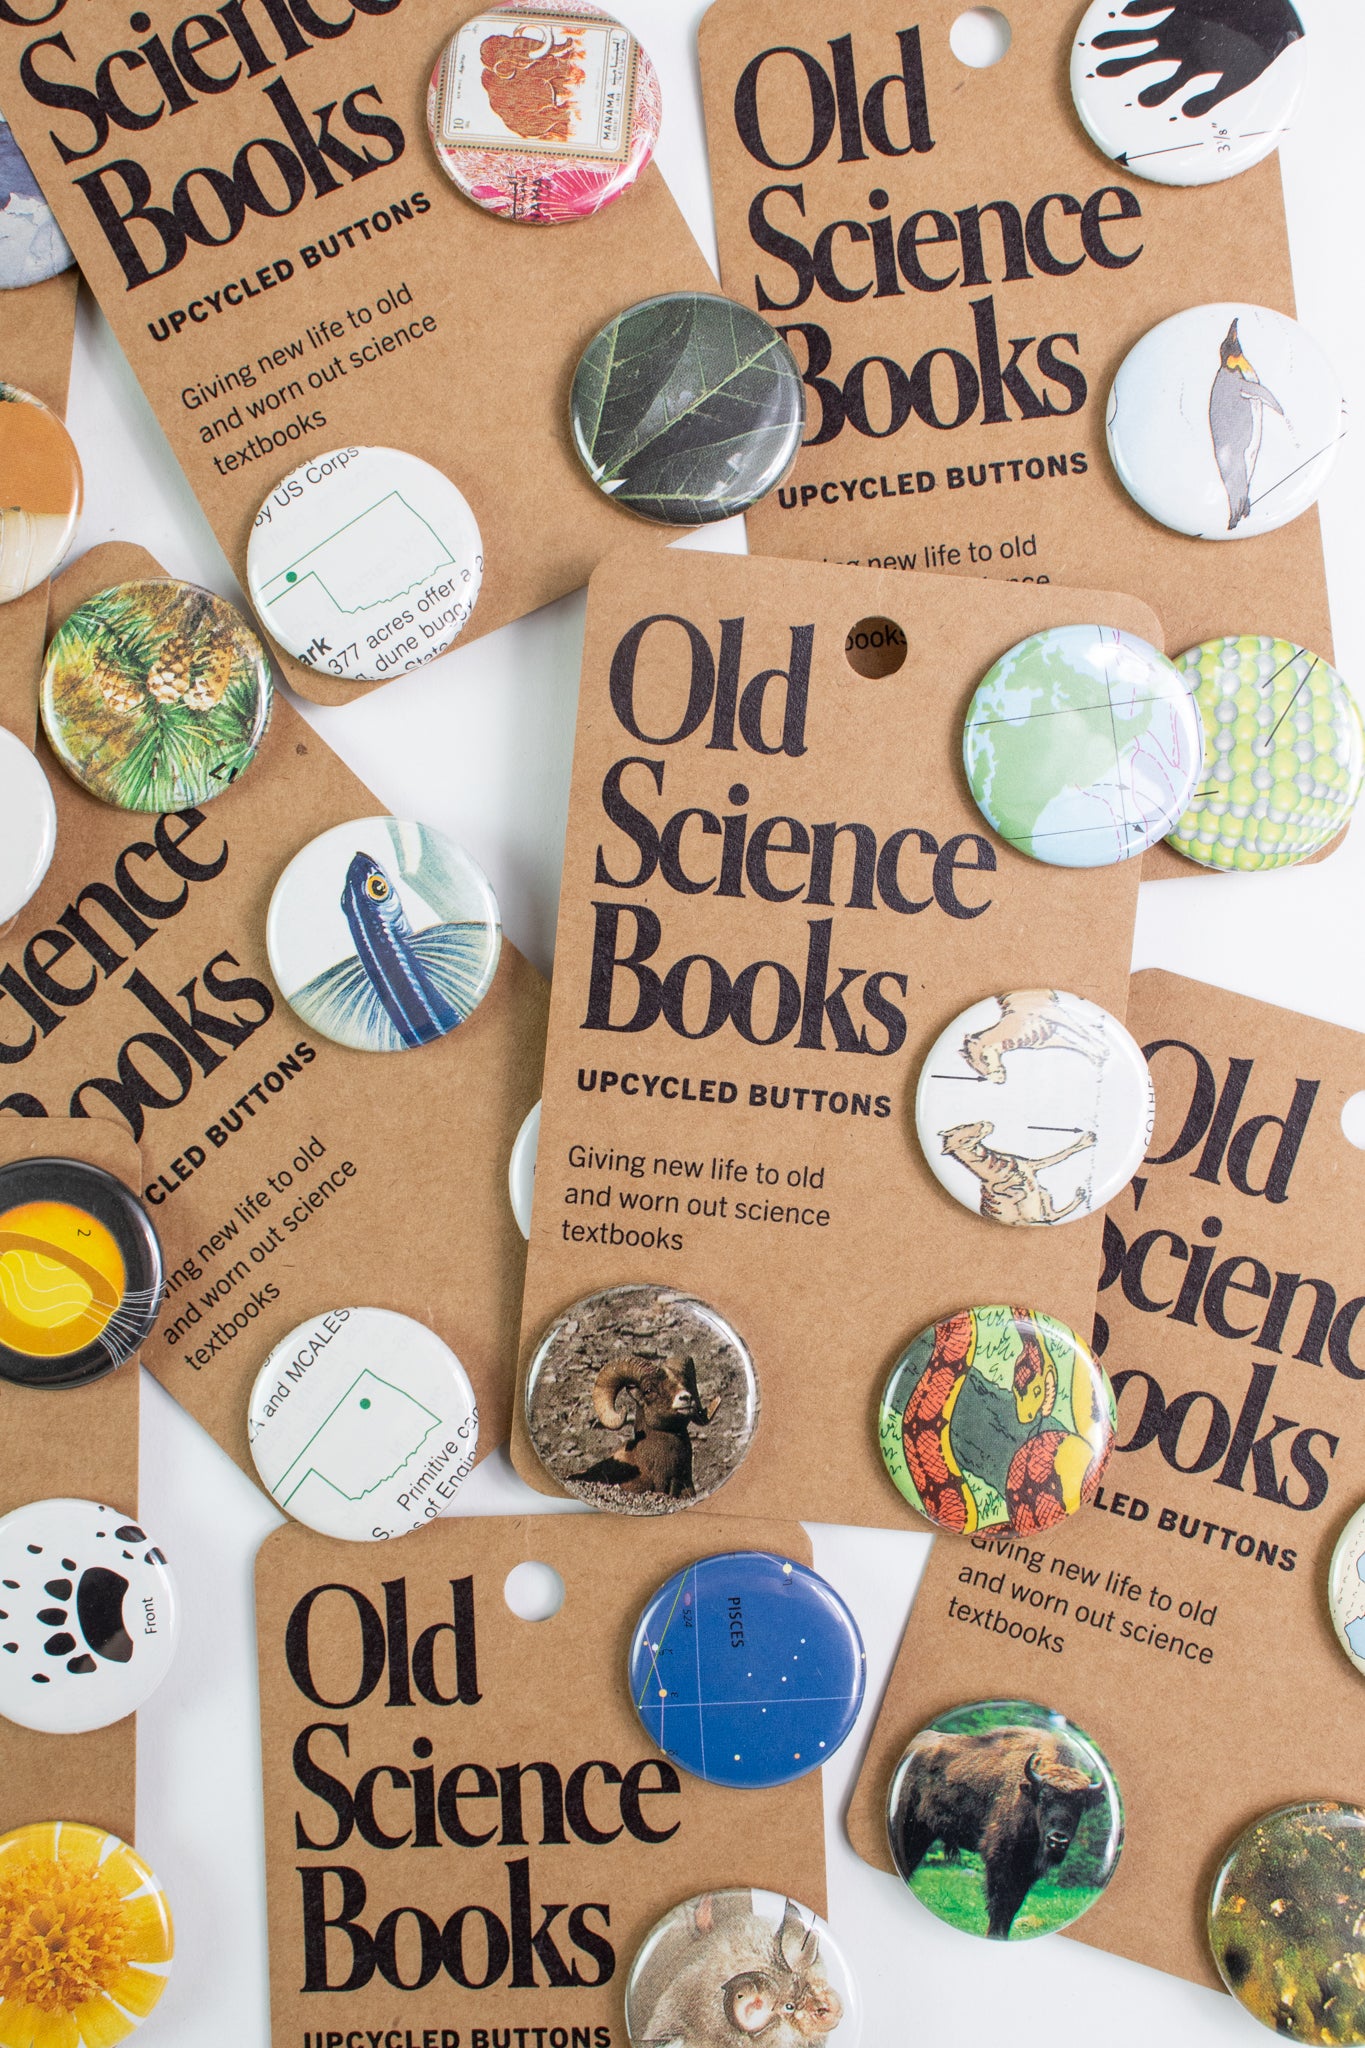 Old Science Books: Upcycled Buttons